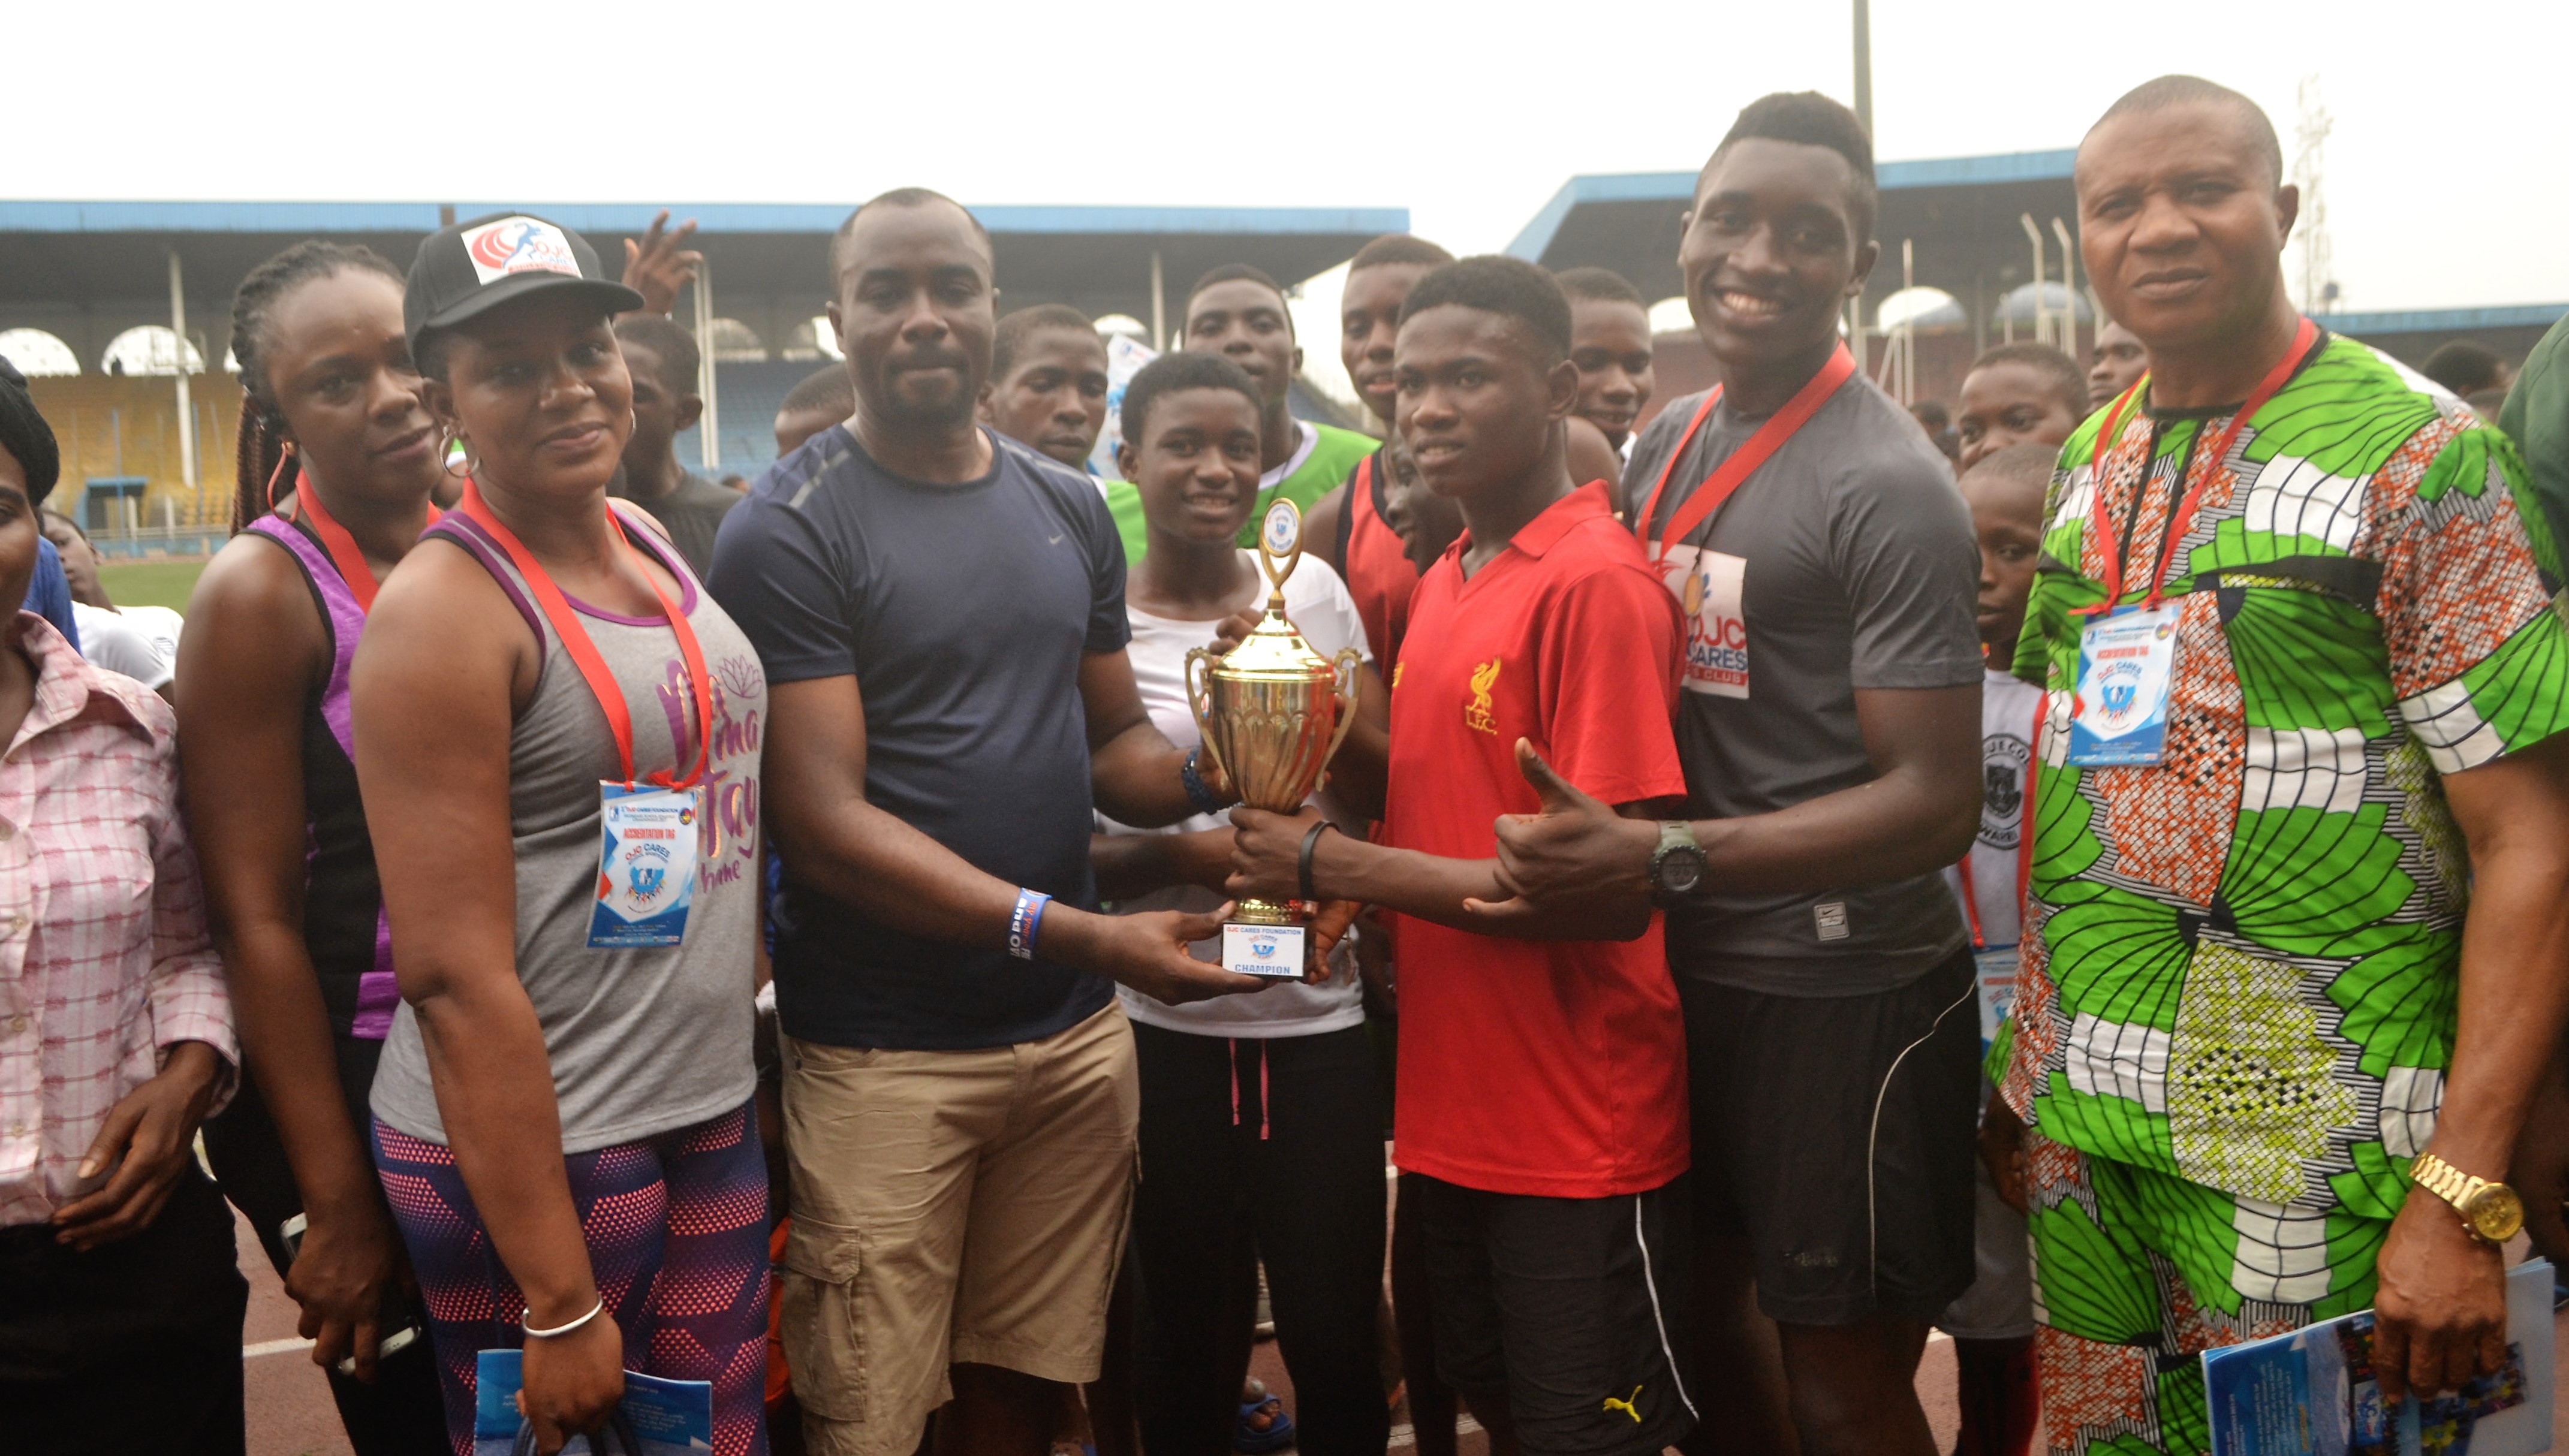 We want to discover athletes from secondary schools, NGO reveals